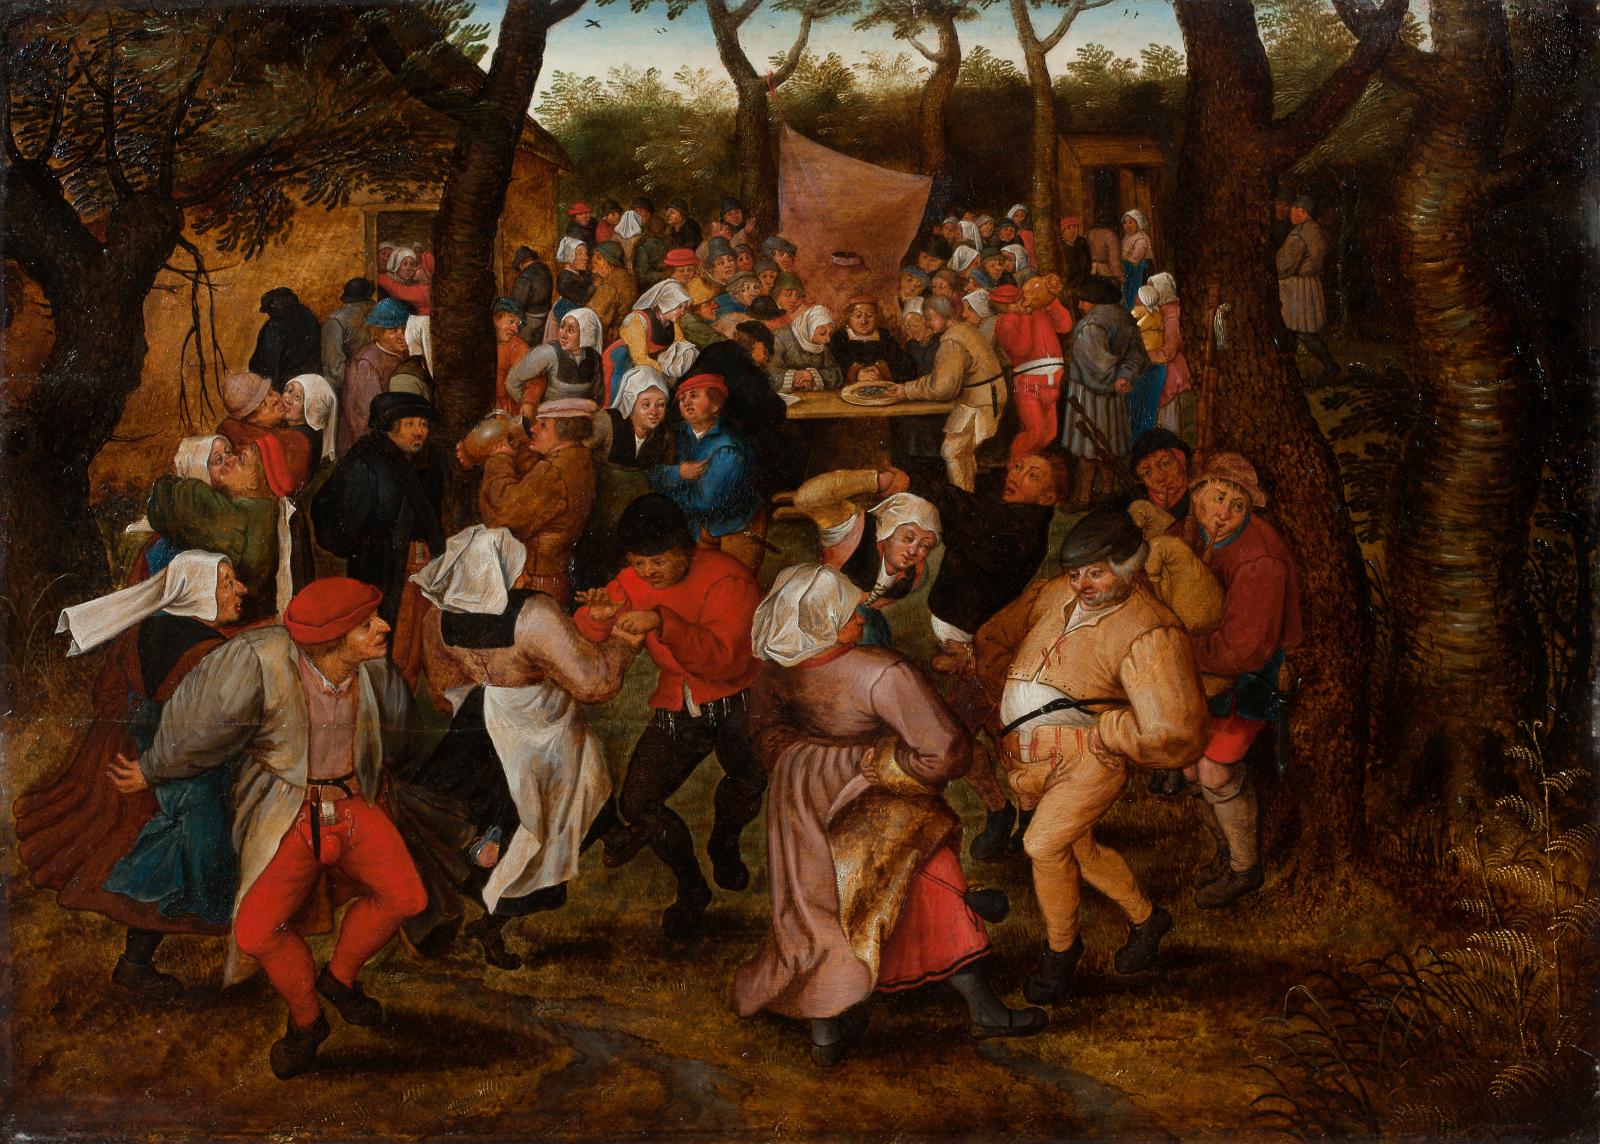 Bruegel at a Whirling Pace